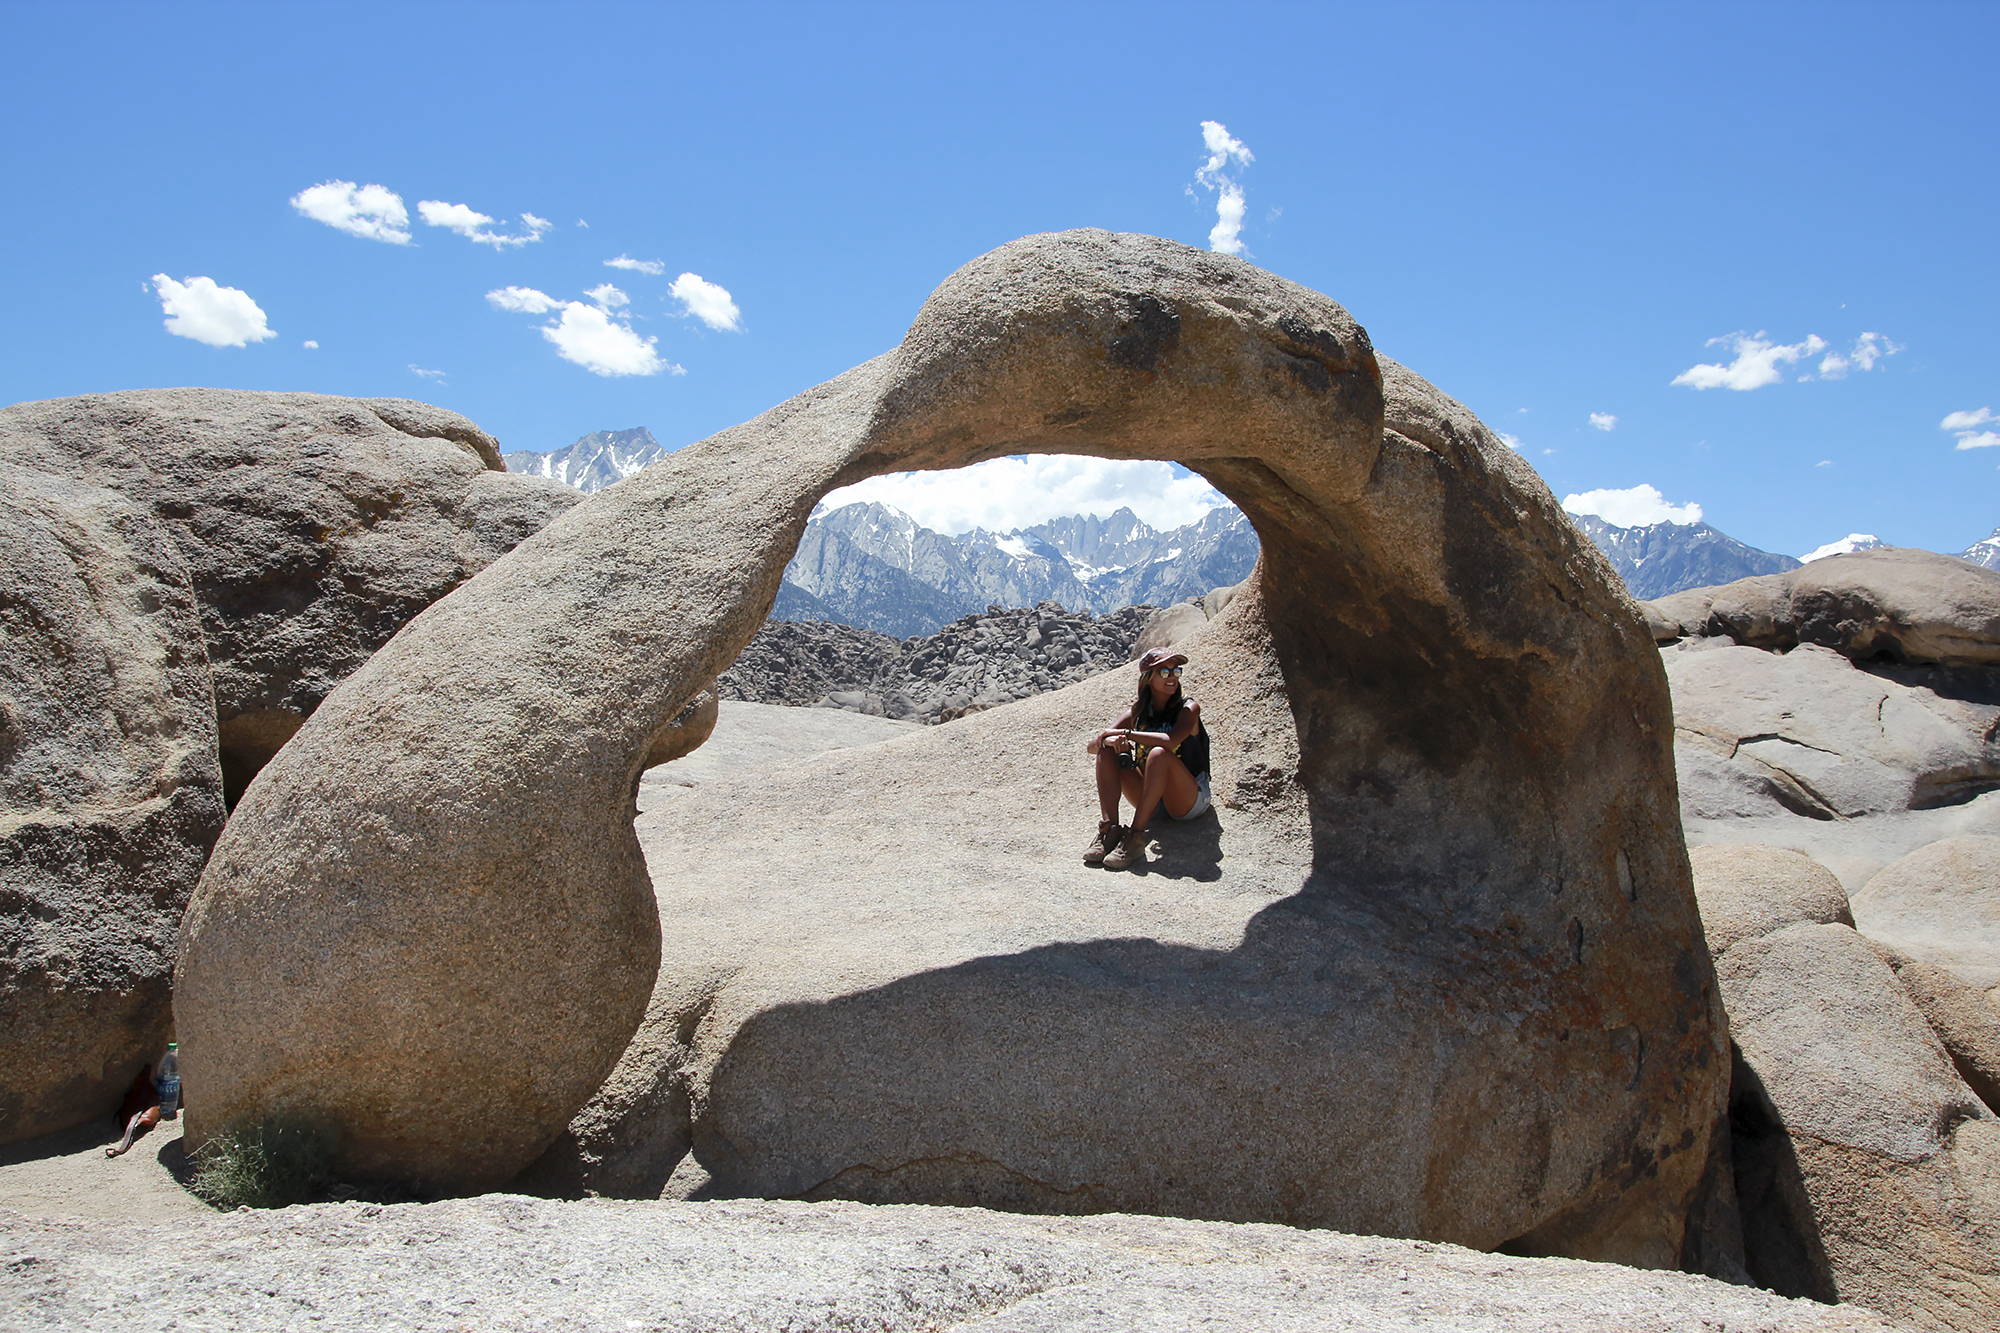 Make Your Road Trip on Highway 395 into an Epic Journey